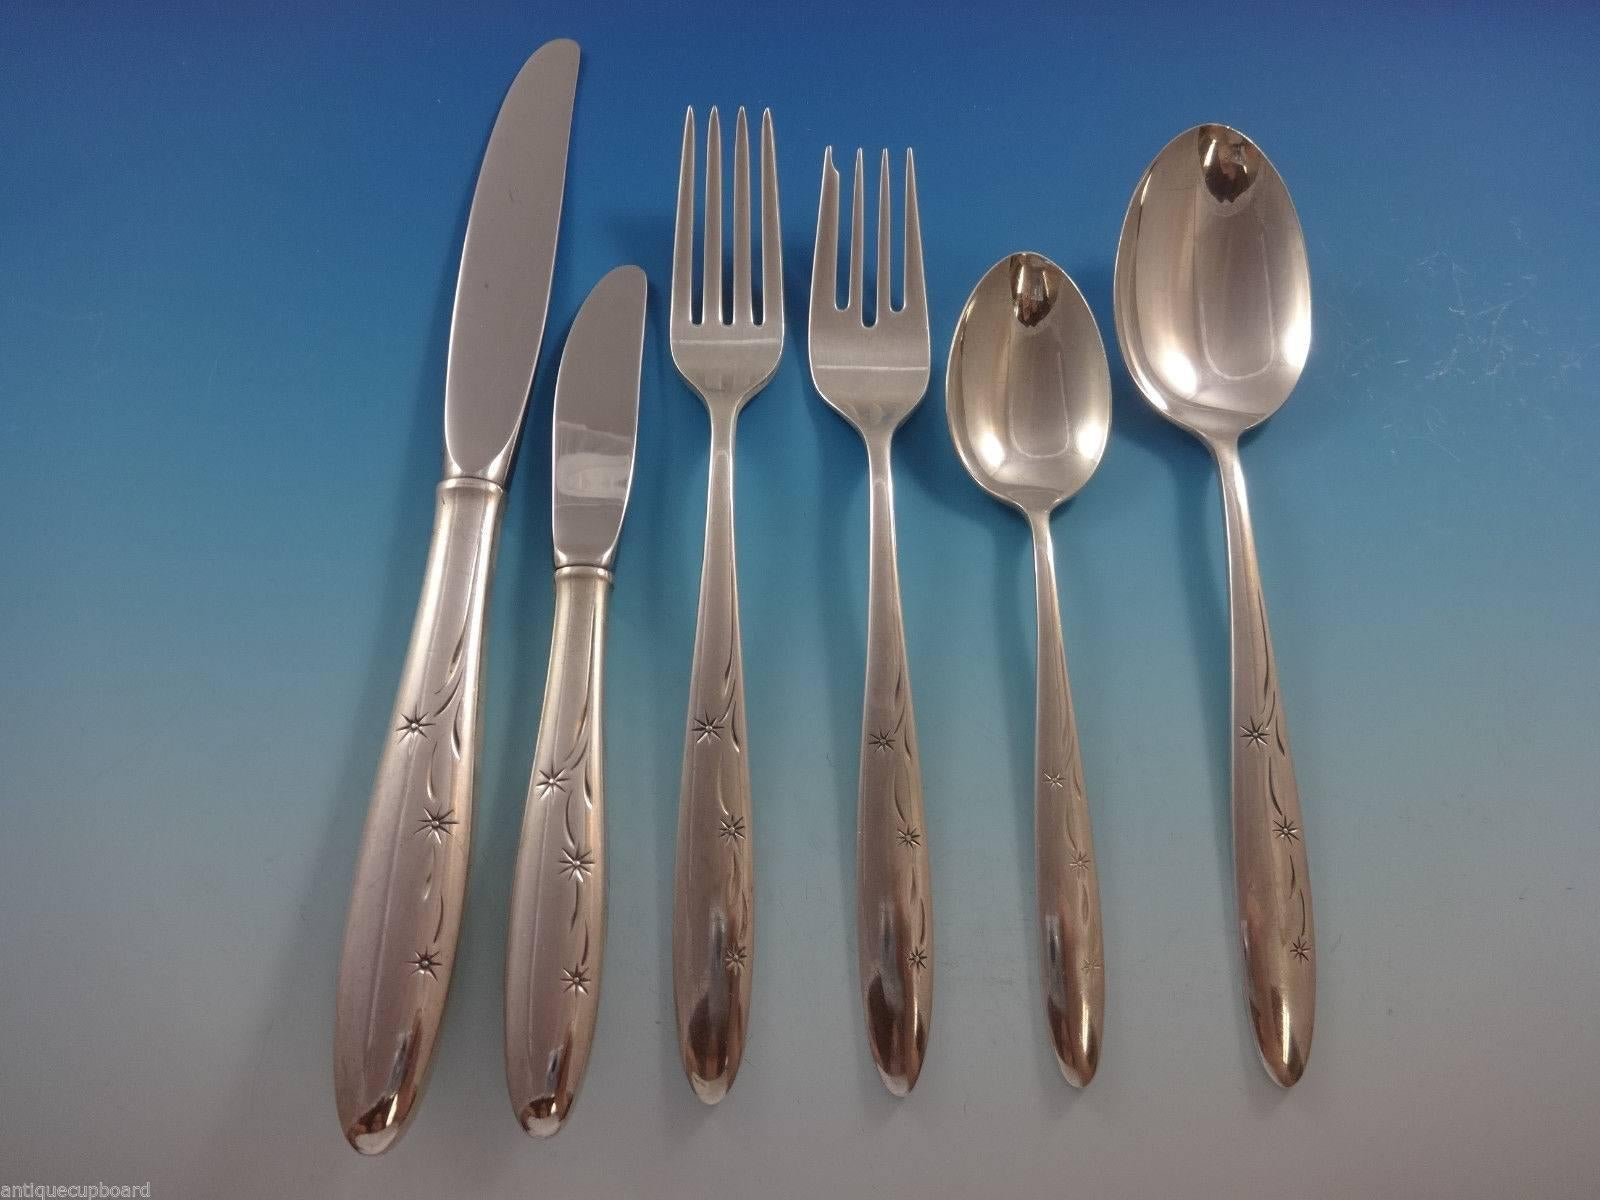 Mid-Century Modern Celeste by Gorham, circa 1956 sterling silver flatware set of 79 pieces. This set includes:

12 knives, 9 3/8